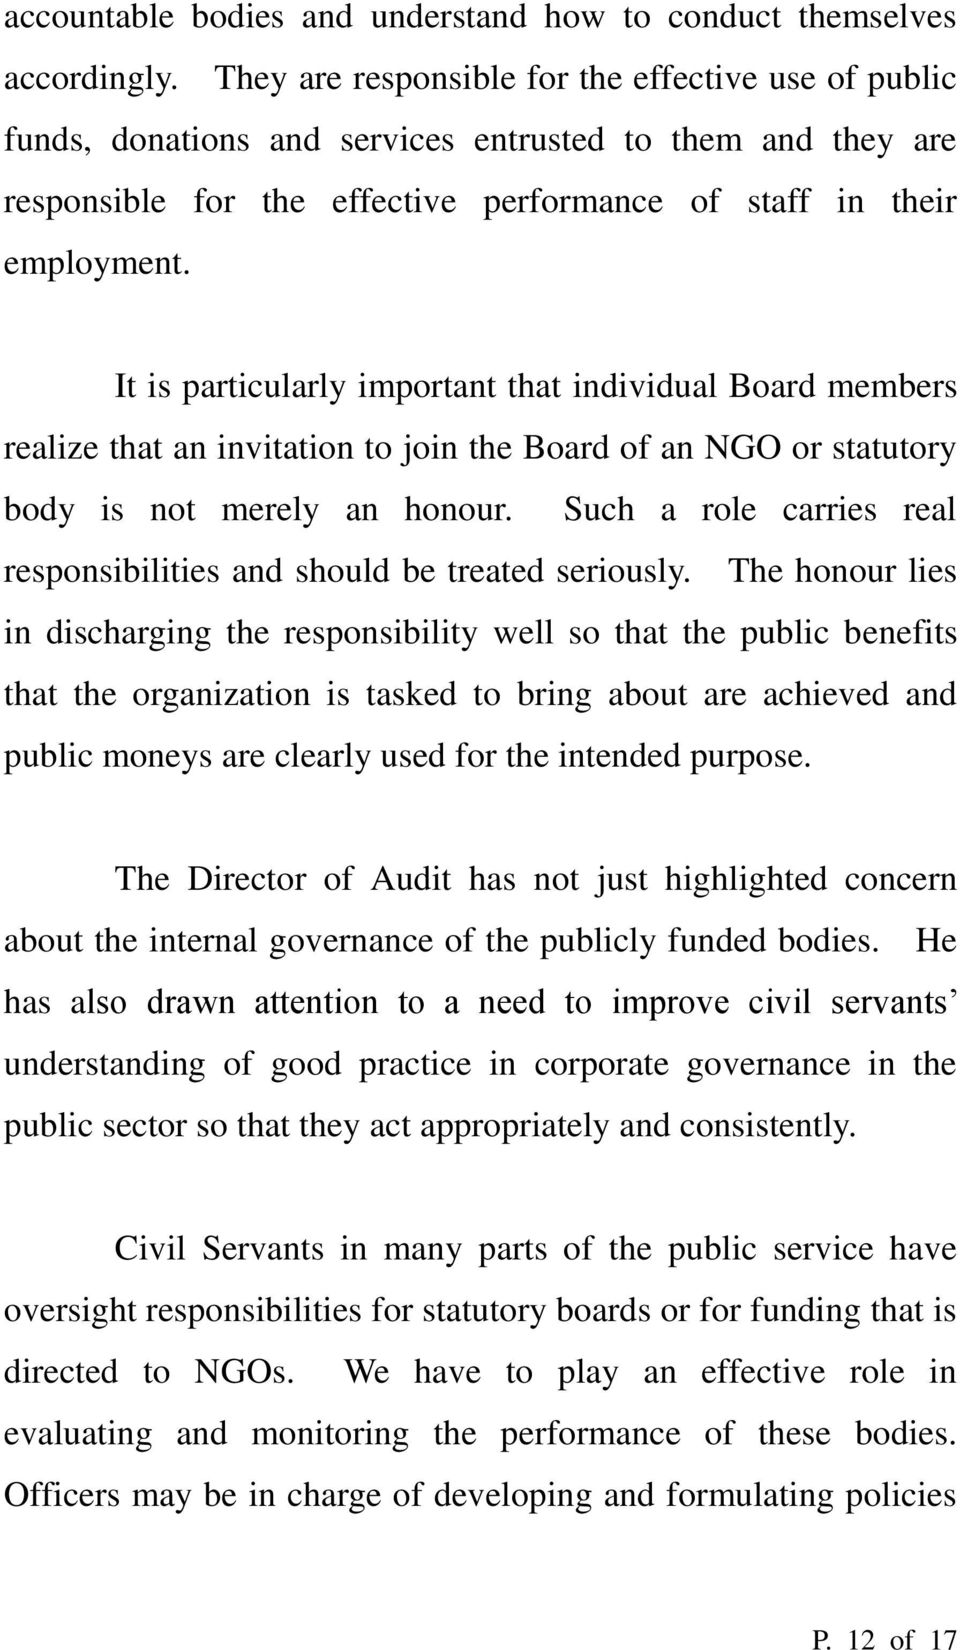 It is particularly important that individual Board members realize that an invitation to join the Board of an NGO or statutory body is not merely an honour.